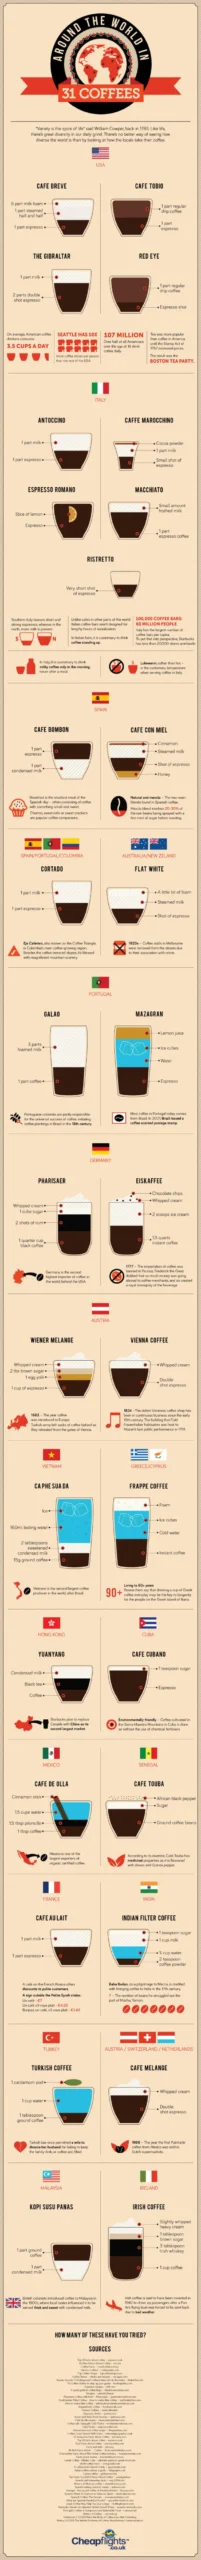 World’s Best History Of Coffee Timeline [InfoGraphic]
